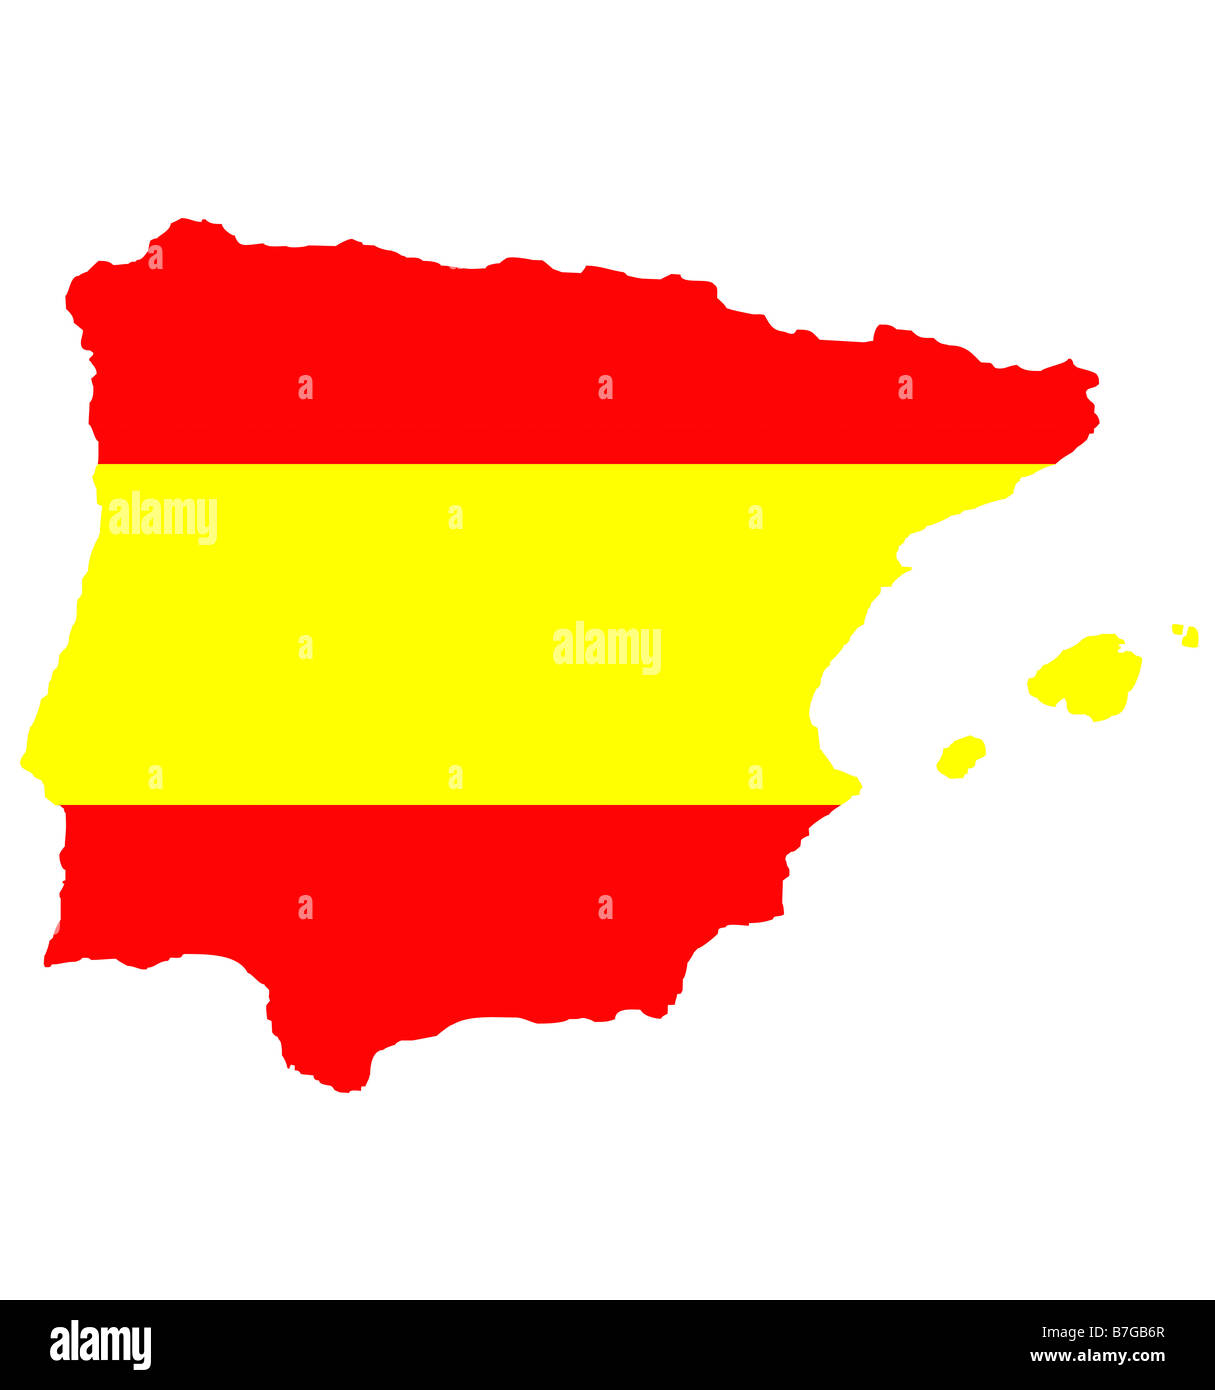 Outline map of Spain and Balearic islands isolated in colors of flag Stock Photo